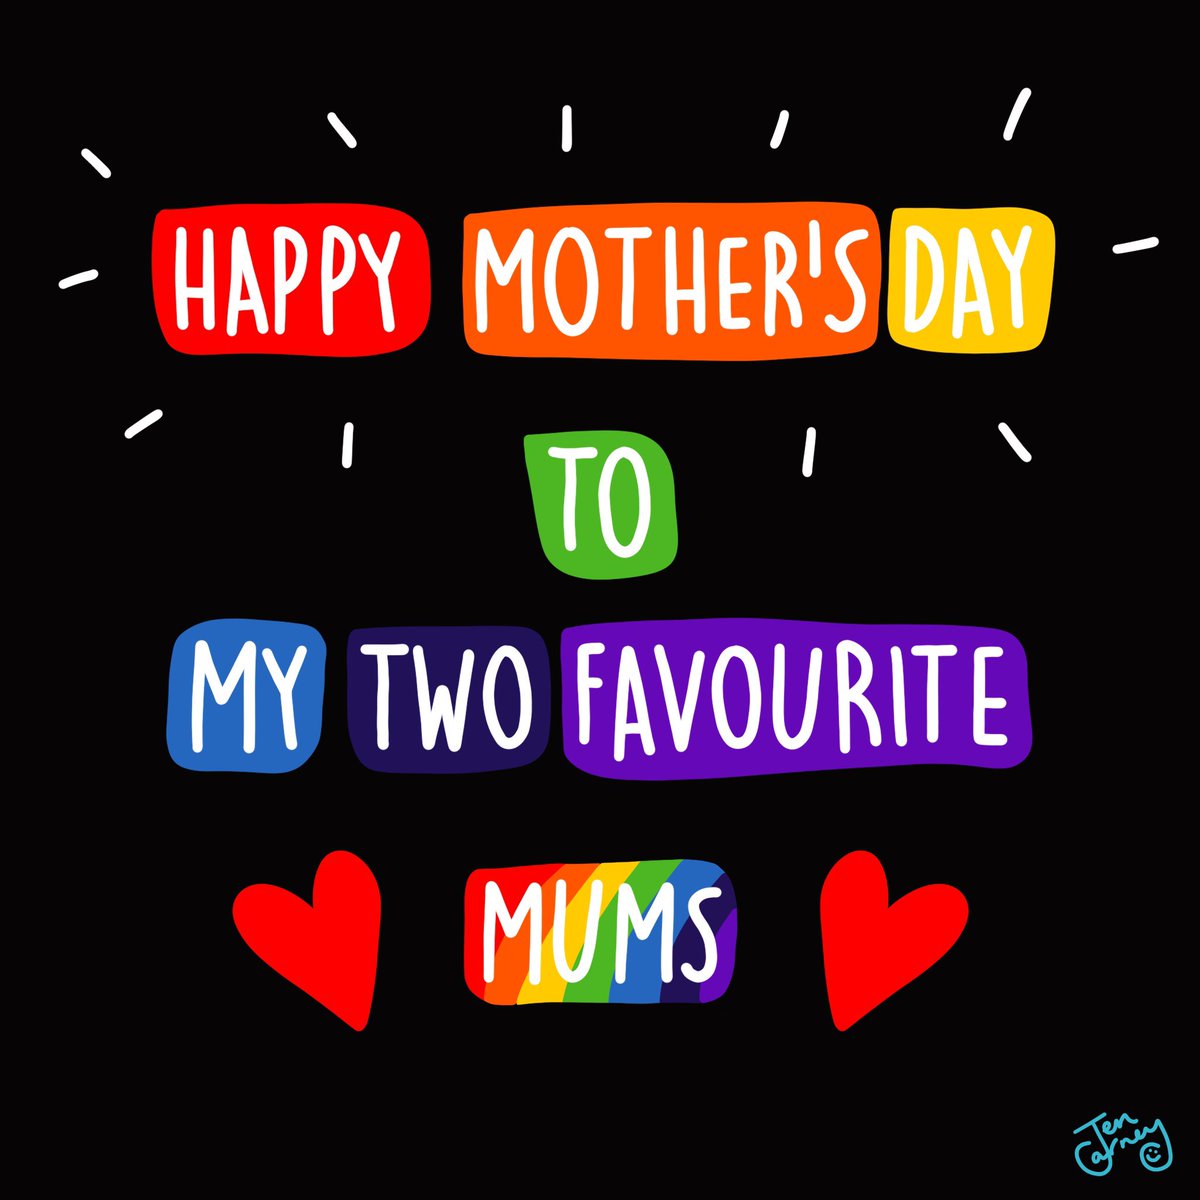 Billie Upton Green has been making a Mother’s Day card. If you have 2 mums, or know someone who does, feel free to share the second image 😍🌈

#twomums #rainbowfamily #lovemakesafamily #mothersday 
#theaccidentaldiaryofbug